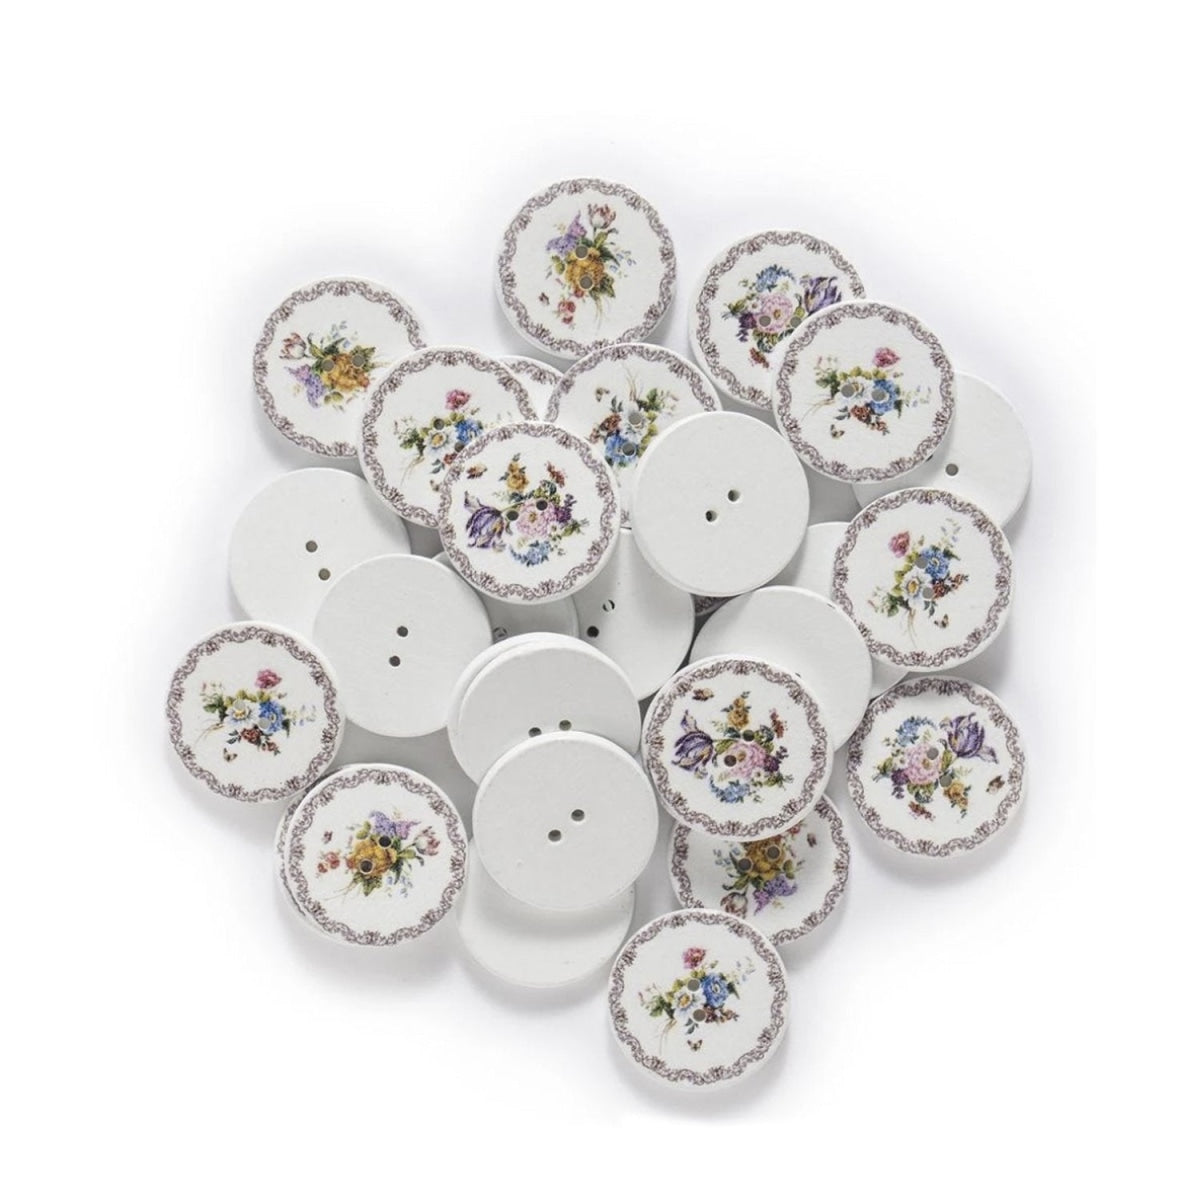 50Pcs Flower Retro Series White Wood Buttons Sewing Scrapbook Clothing 15-25Mm 15Mm